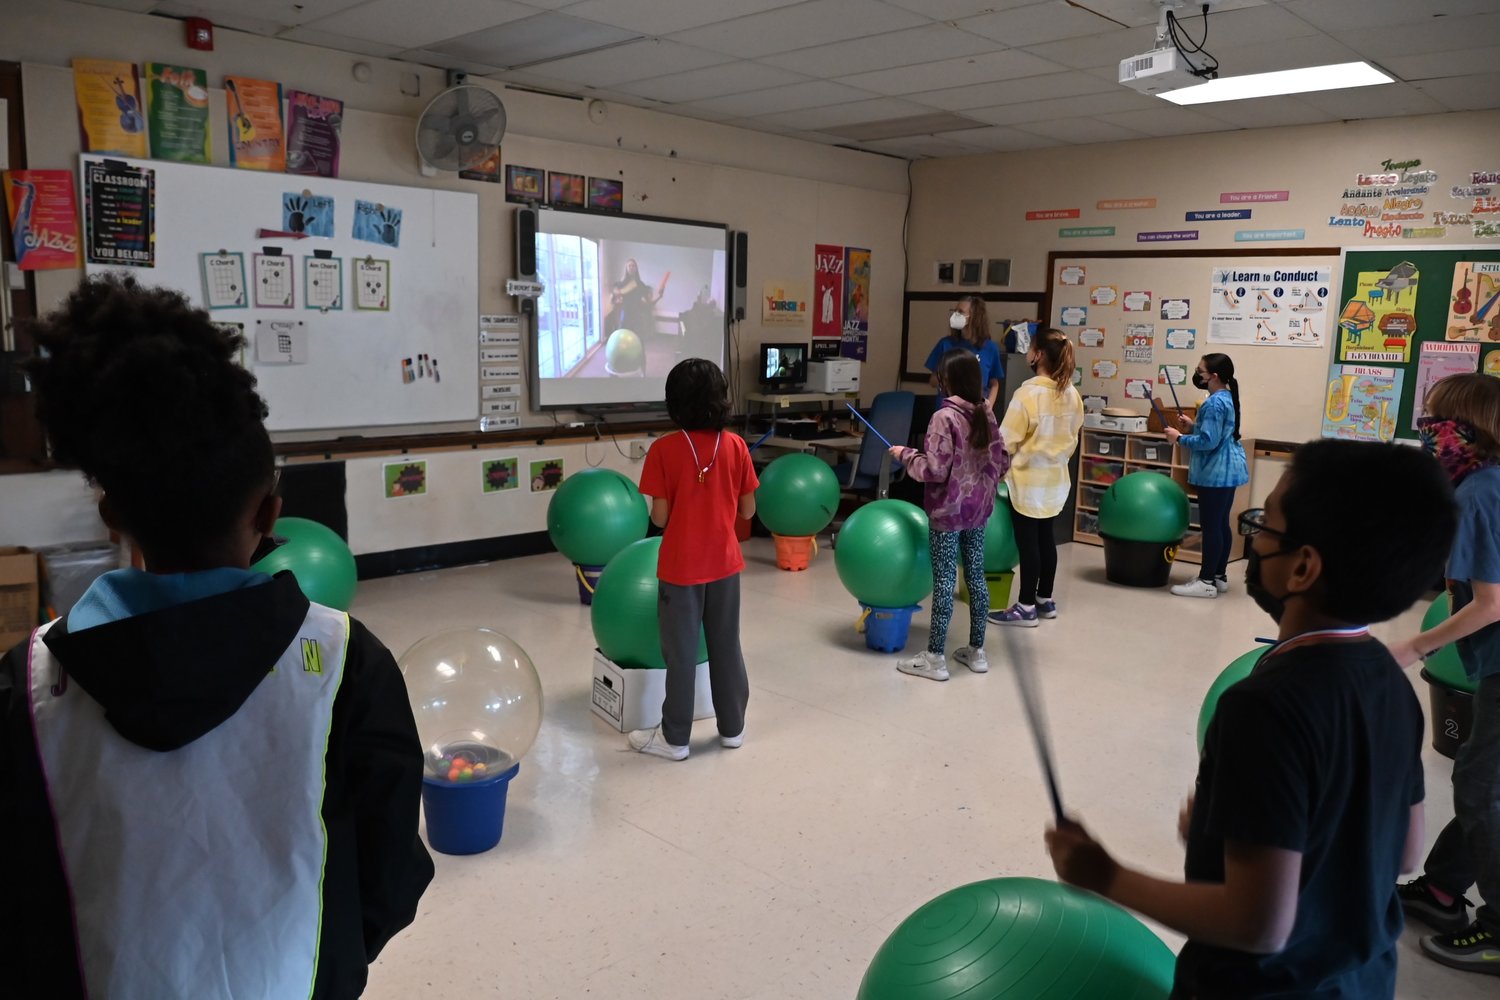 Students practiced their cardio drumming.